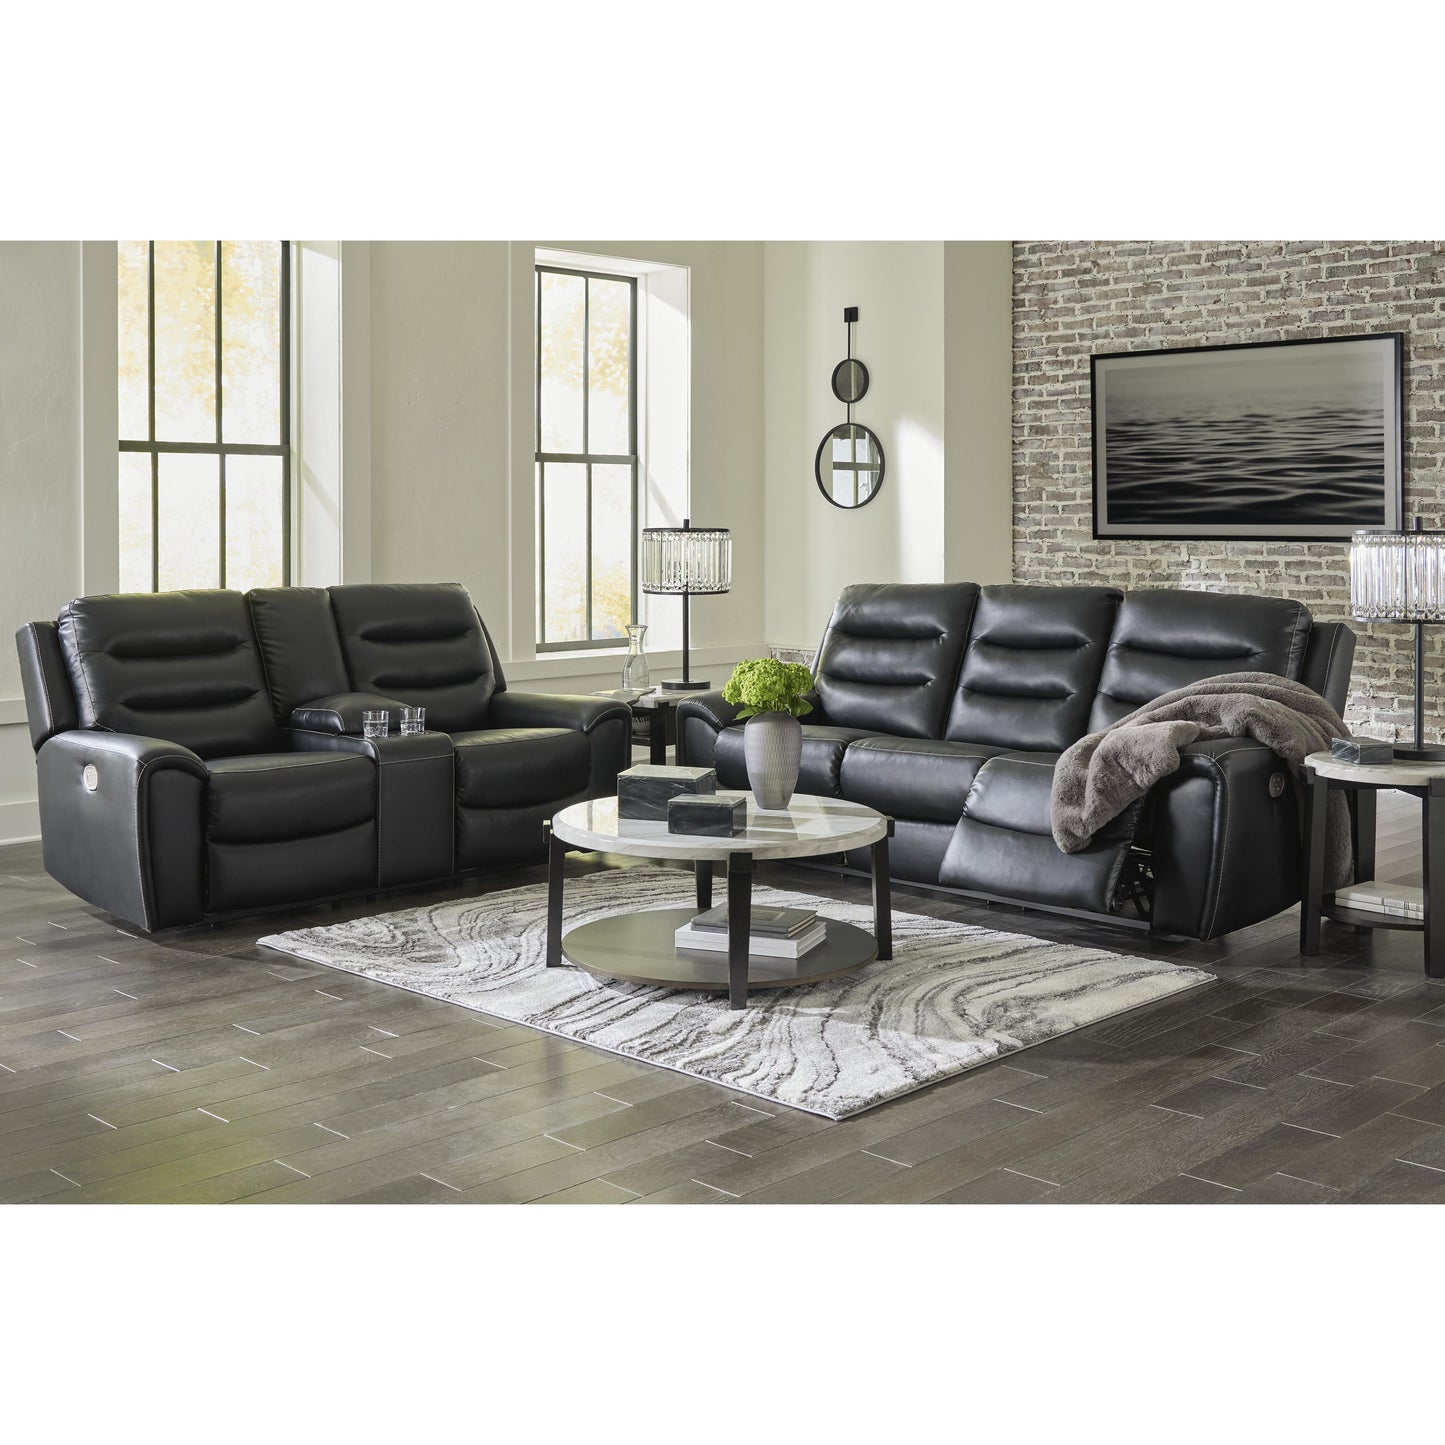 Signature Design by Ashley Warlin Power Reclining Leather Look Sofa 6110515 IMAGE 11